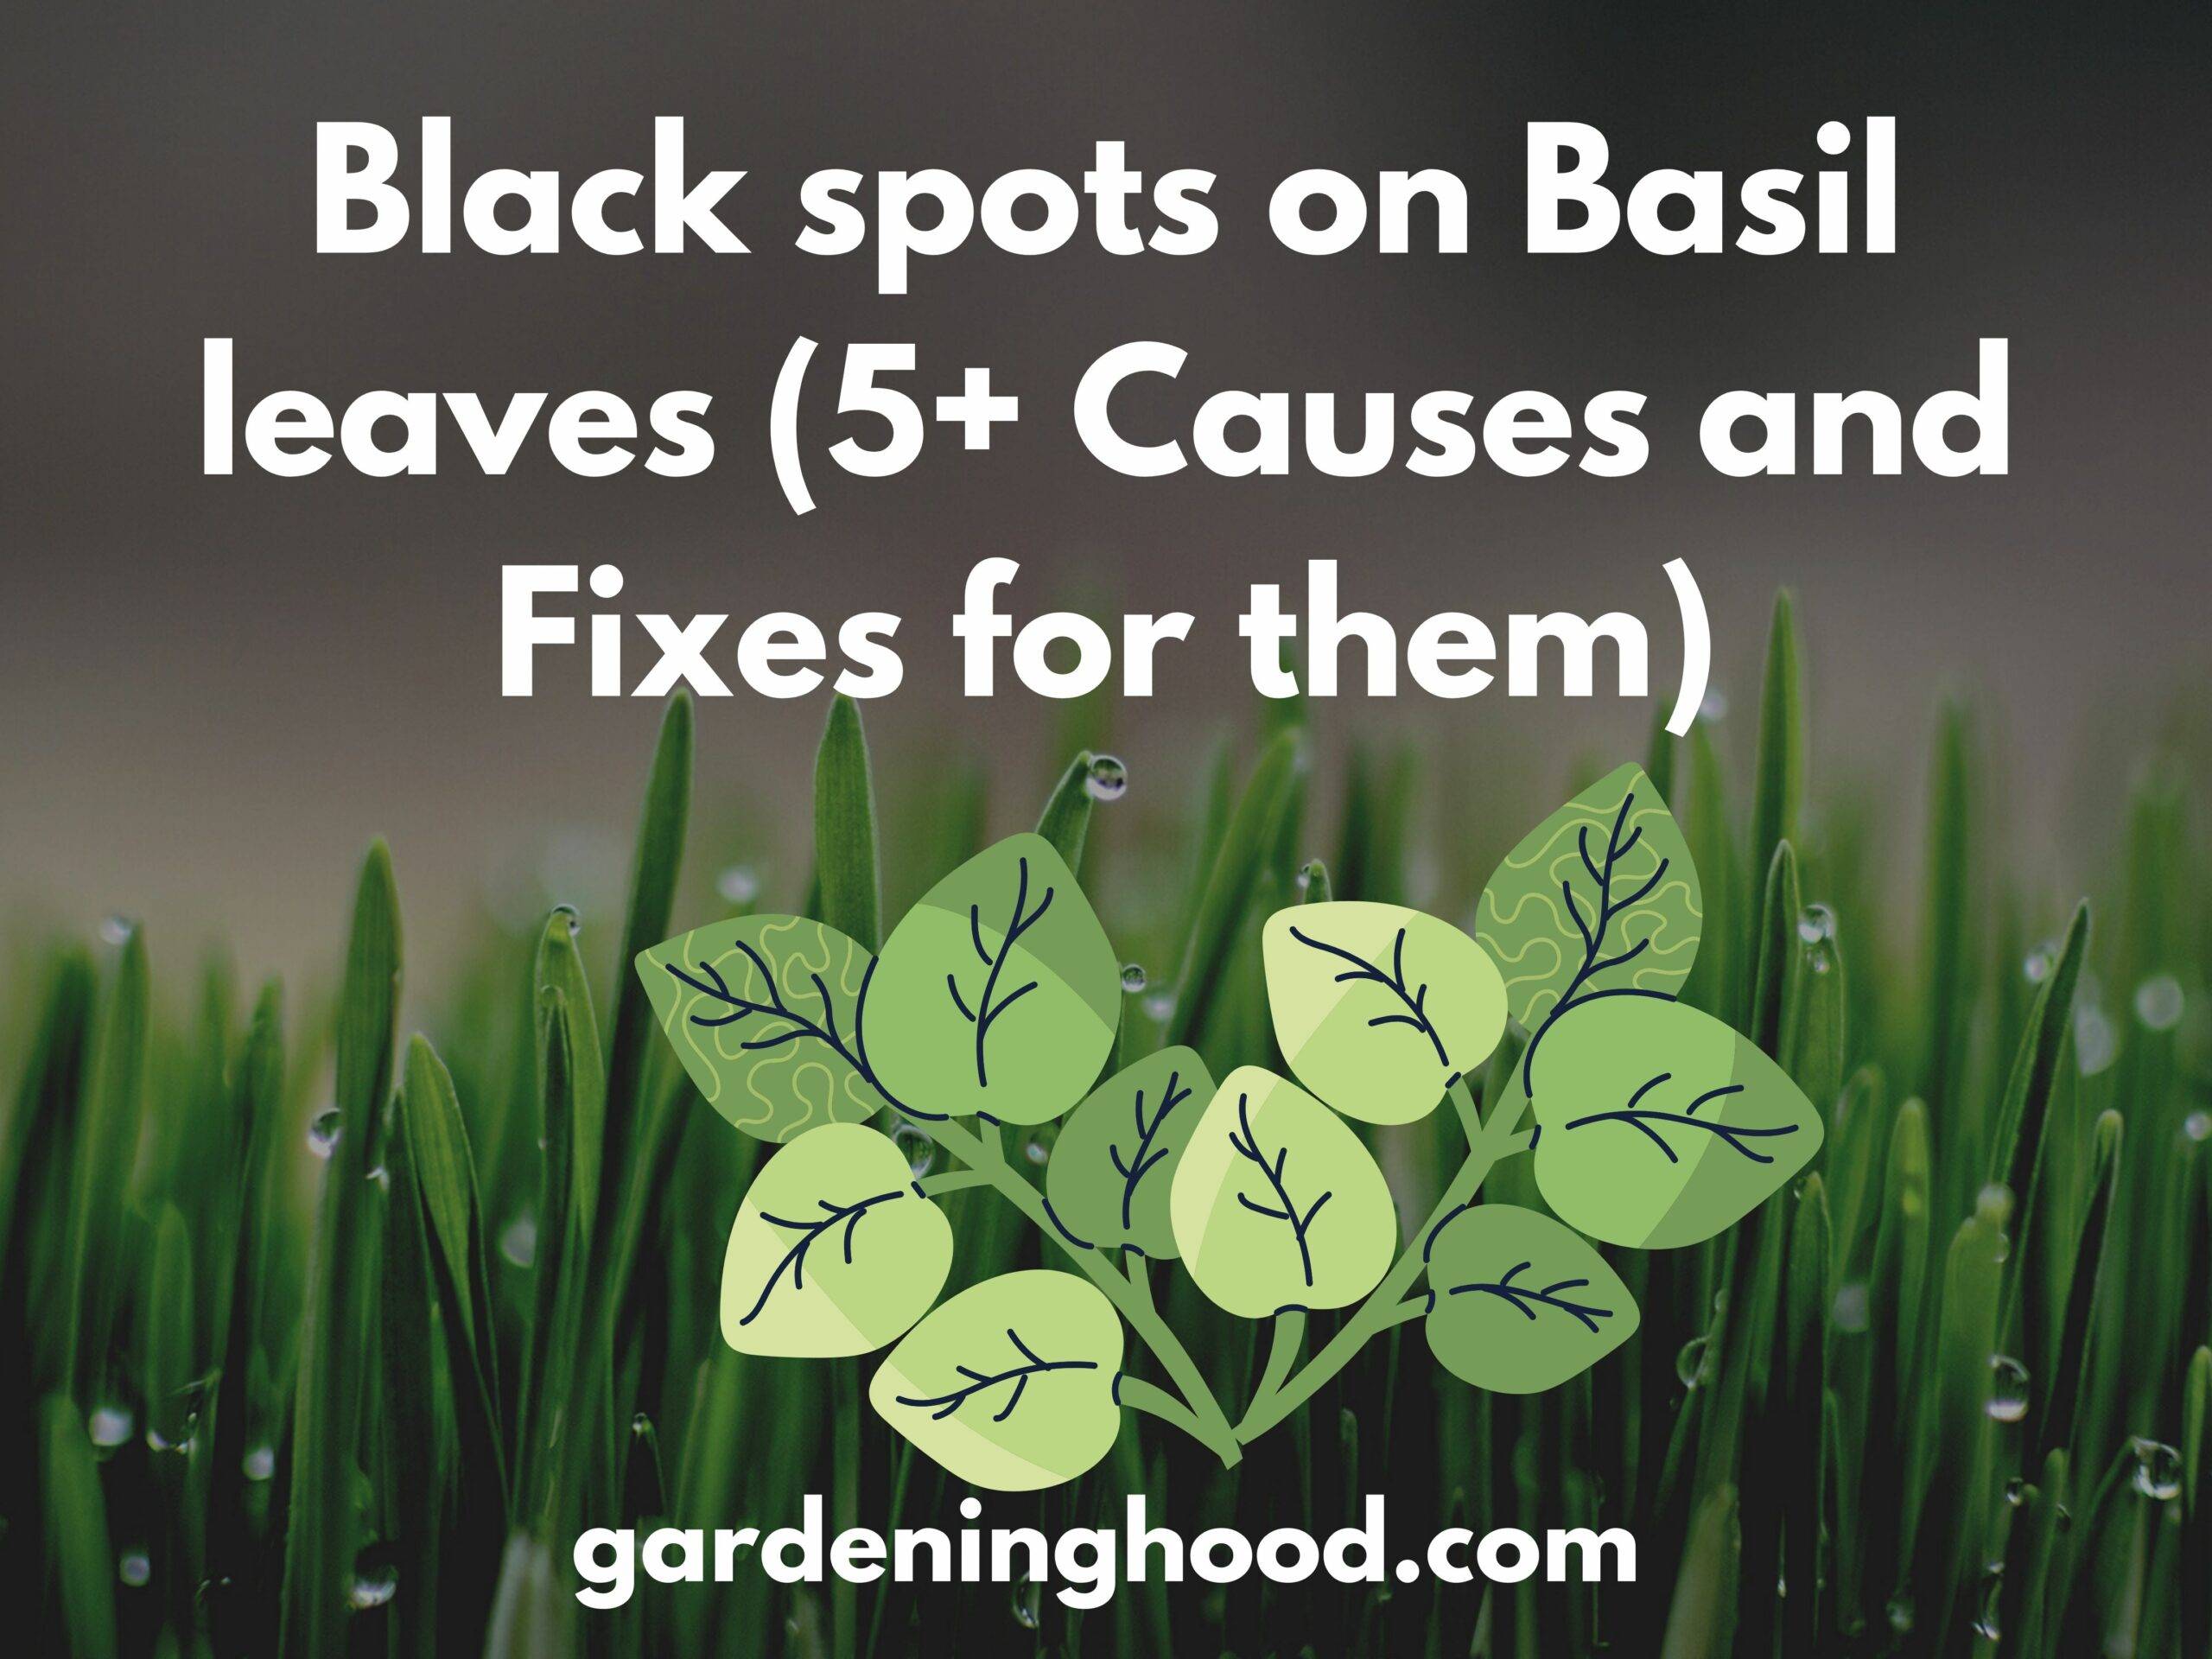 Black spots on Basil leaves (5+ Causes and Fixes for them)